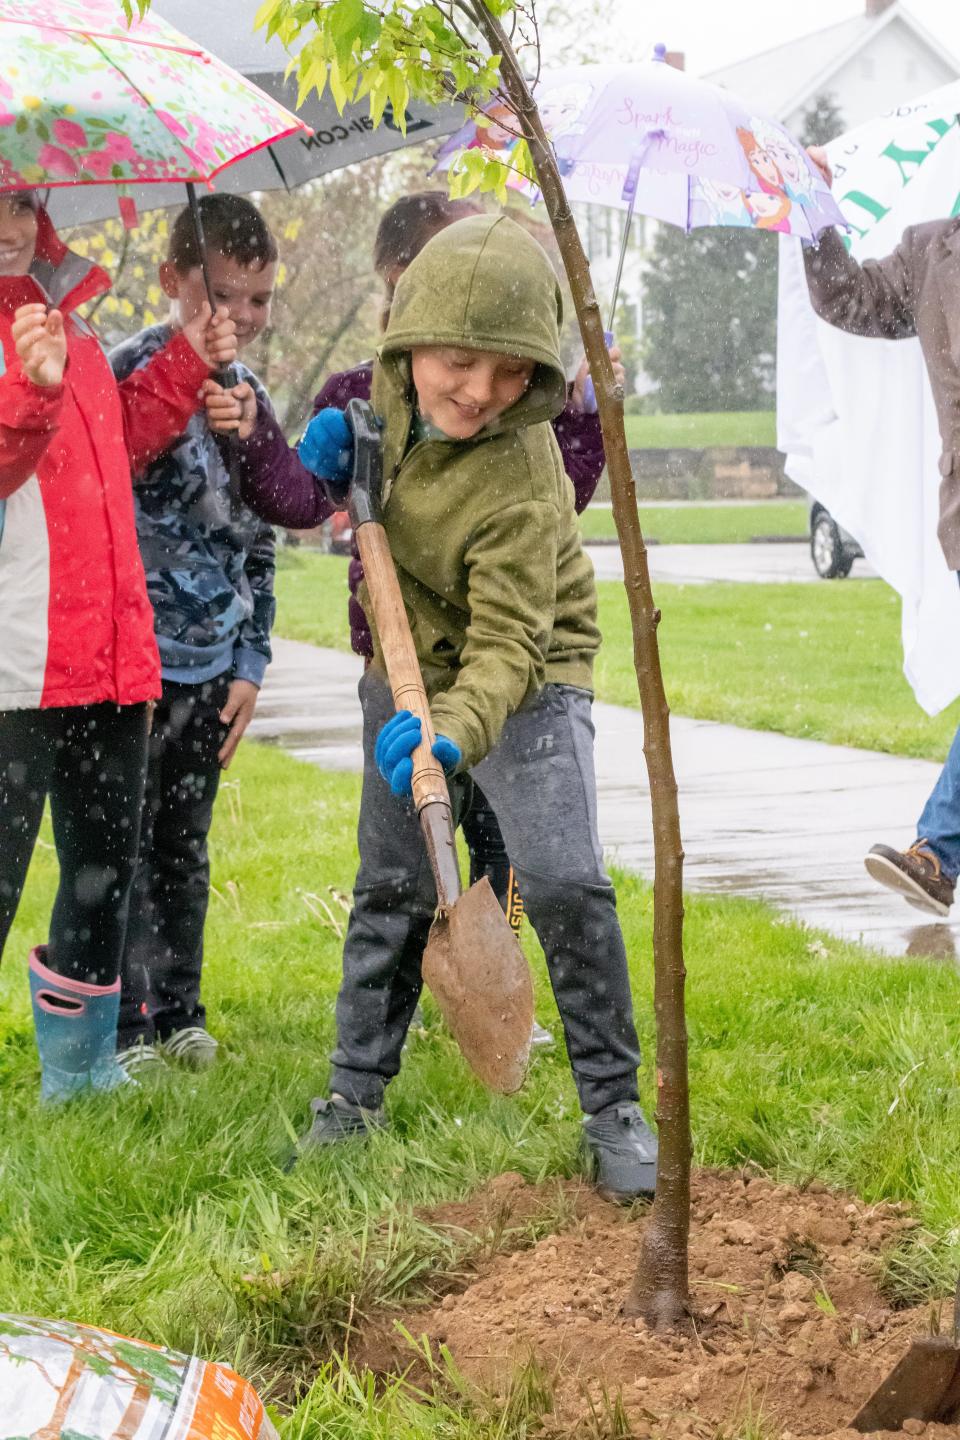 Second graders from New Concord Elementary shovel dirt onto a freshly planted tree in New Concord for Arbor Day.